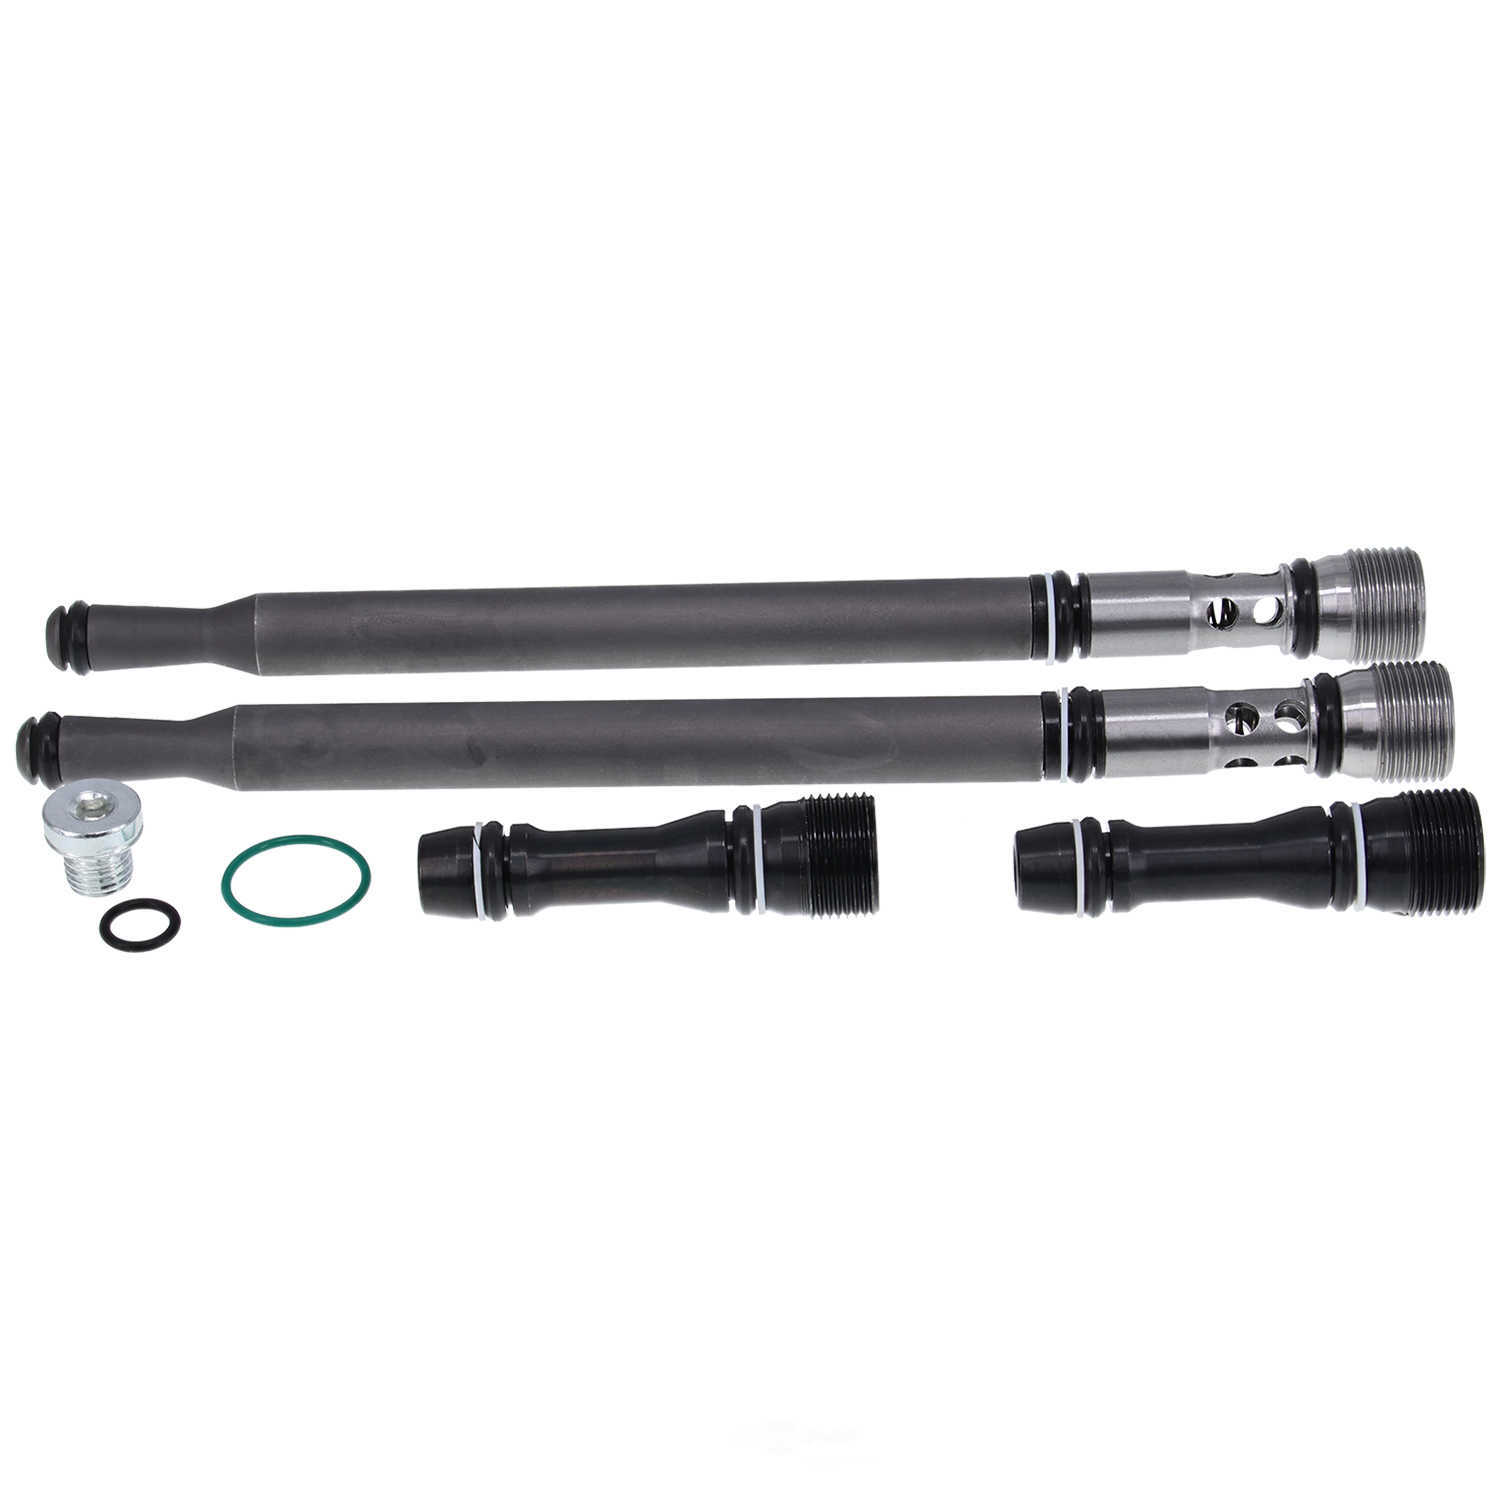 GB REMANUFACTURING INC. - 6.0L Stand Pipe Kit - GBR 522-073